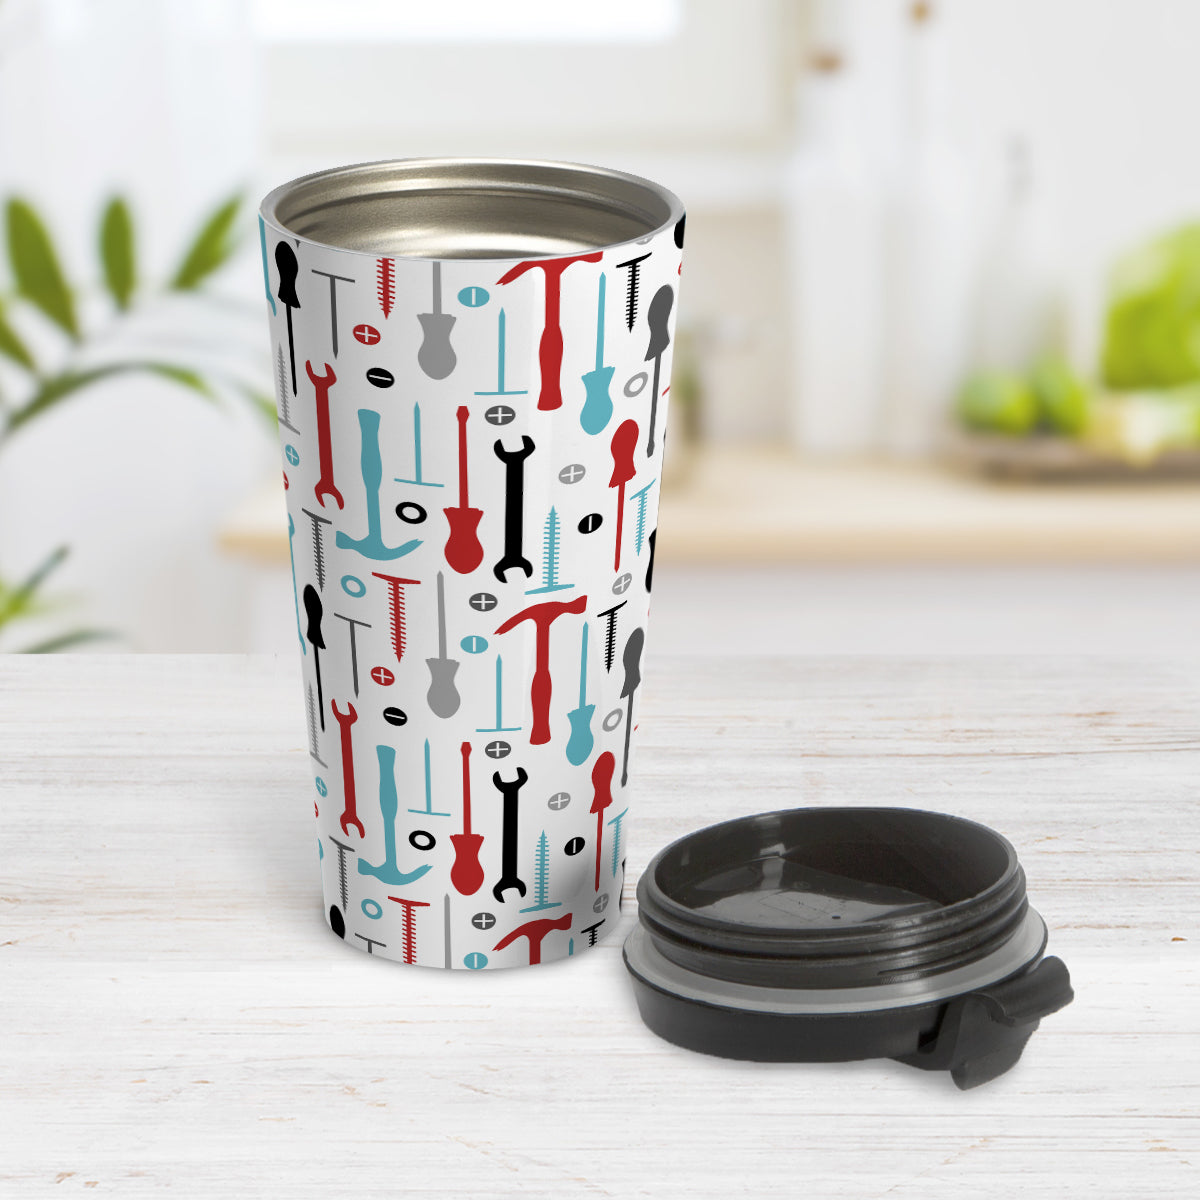 Red Turquoise Tools Pattern Travel Mug (15oz) at Amy's Coffee Mugs. A stainless steel insulated travel mug with a modern style pattern of tools in red, turquoise, black, and gray over white that wraps around the mug. Perfect for any handyman or contractor. 